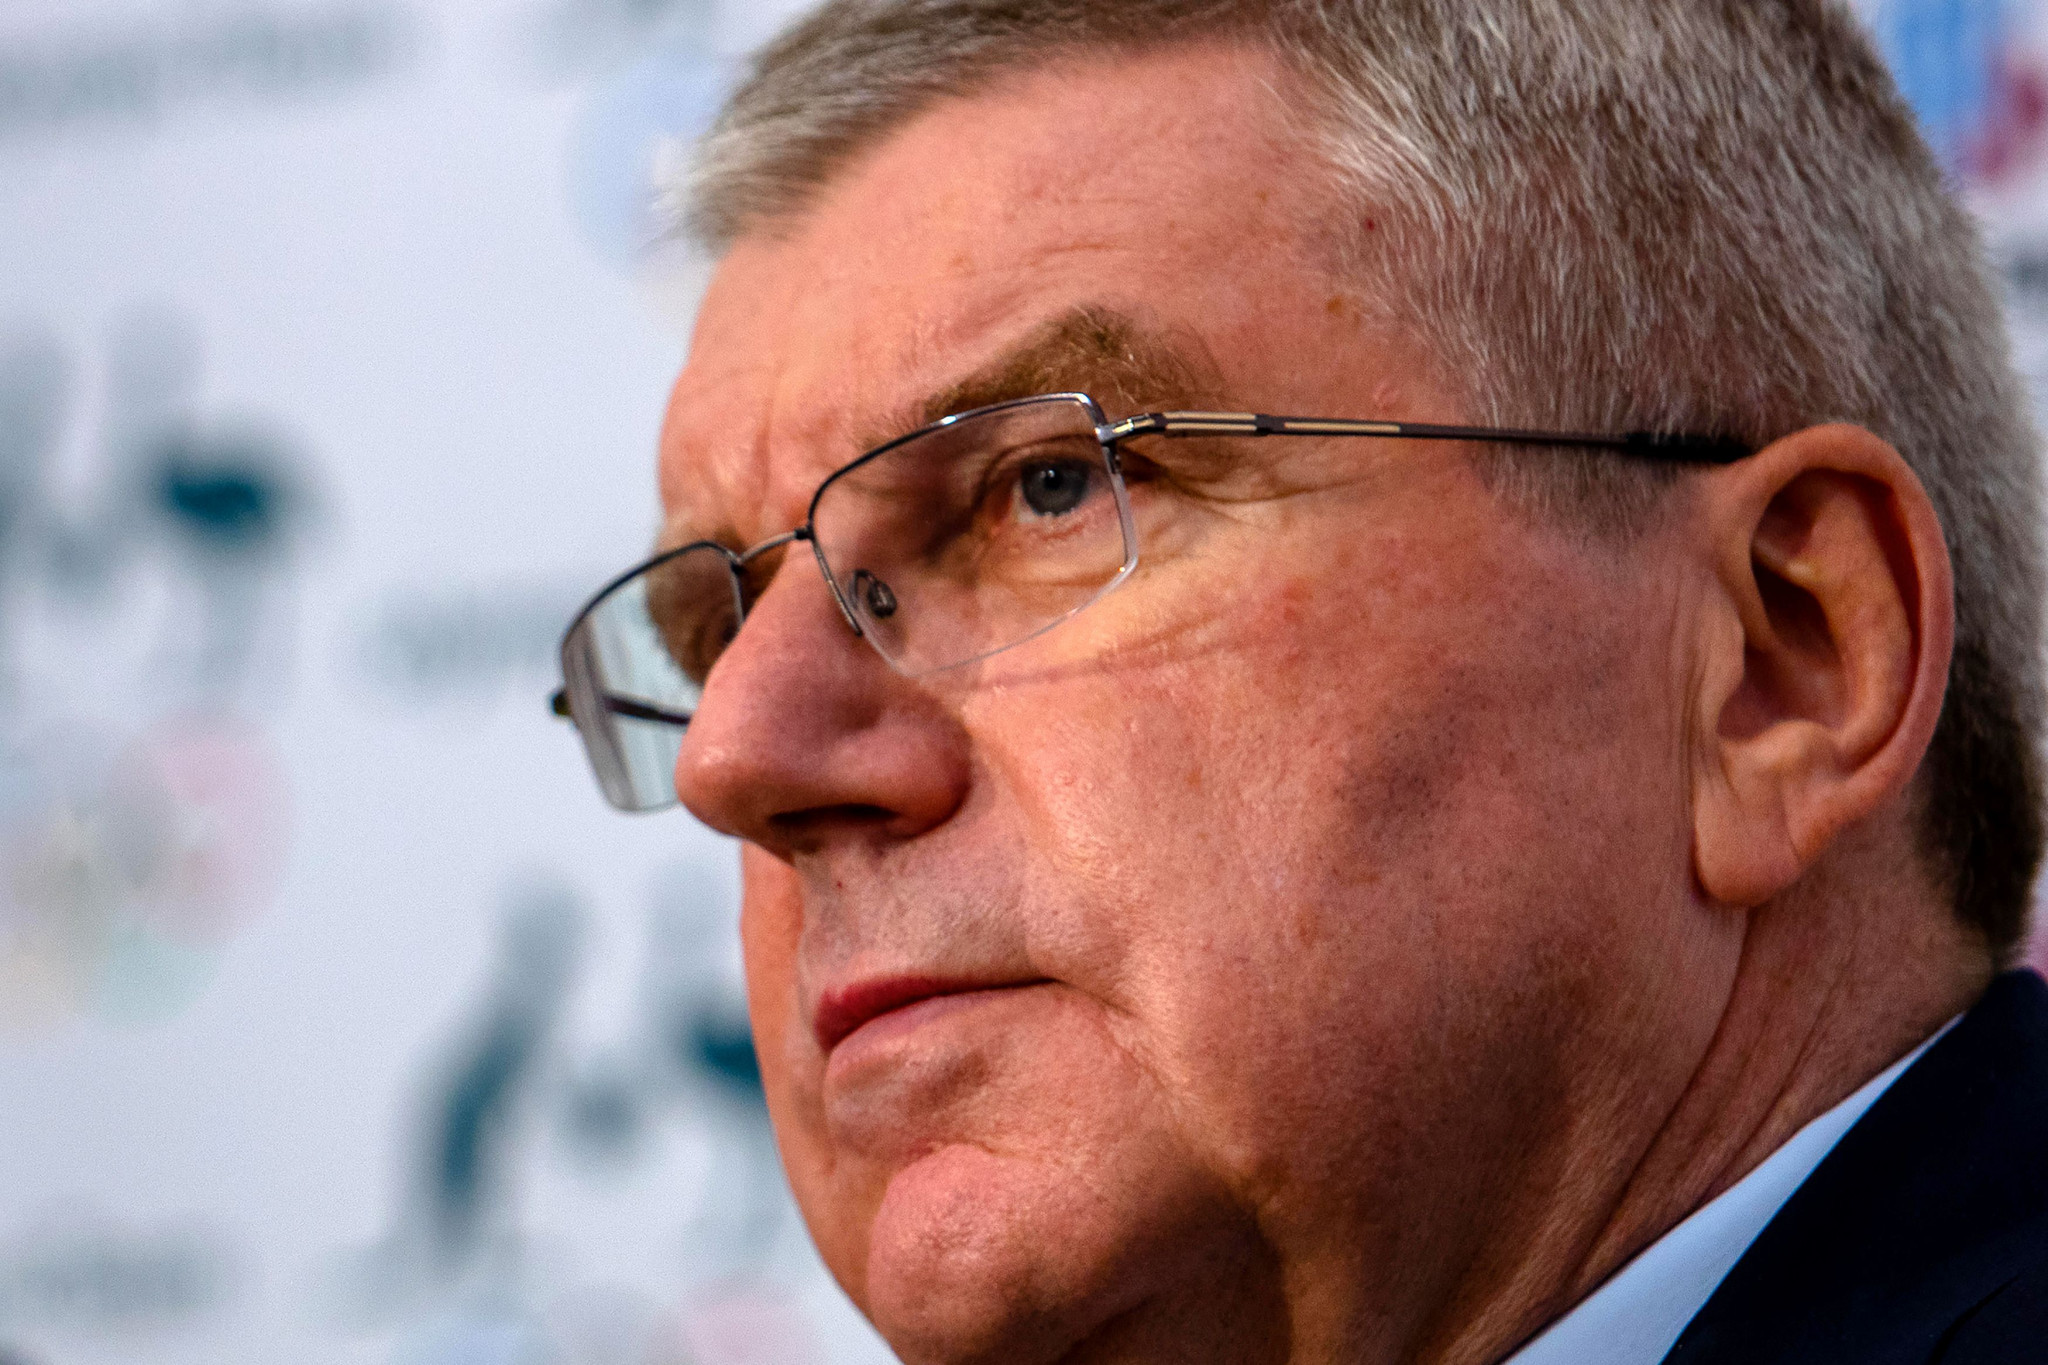 IOC President Thomas Bach has admitted an organisation other than AIBA could organise the boxing tournament at Tokyo 2020 ©Getty Images